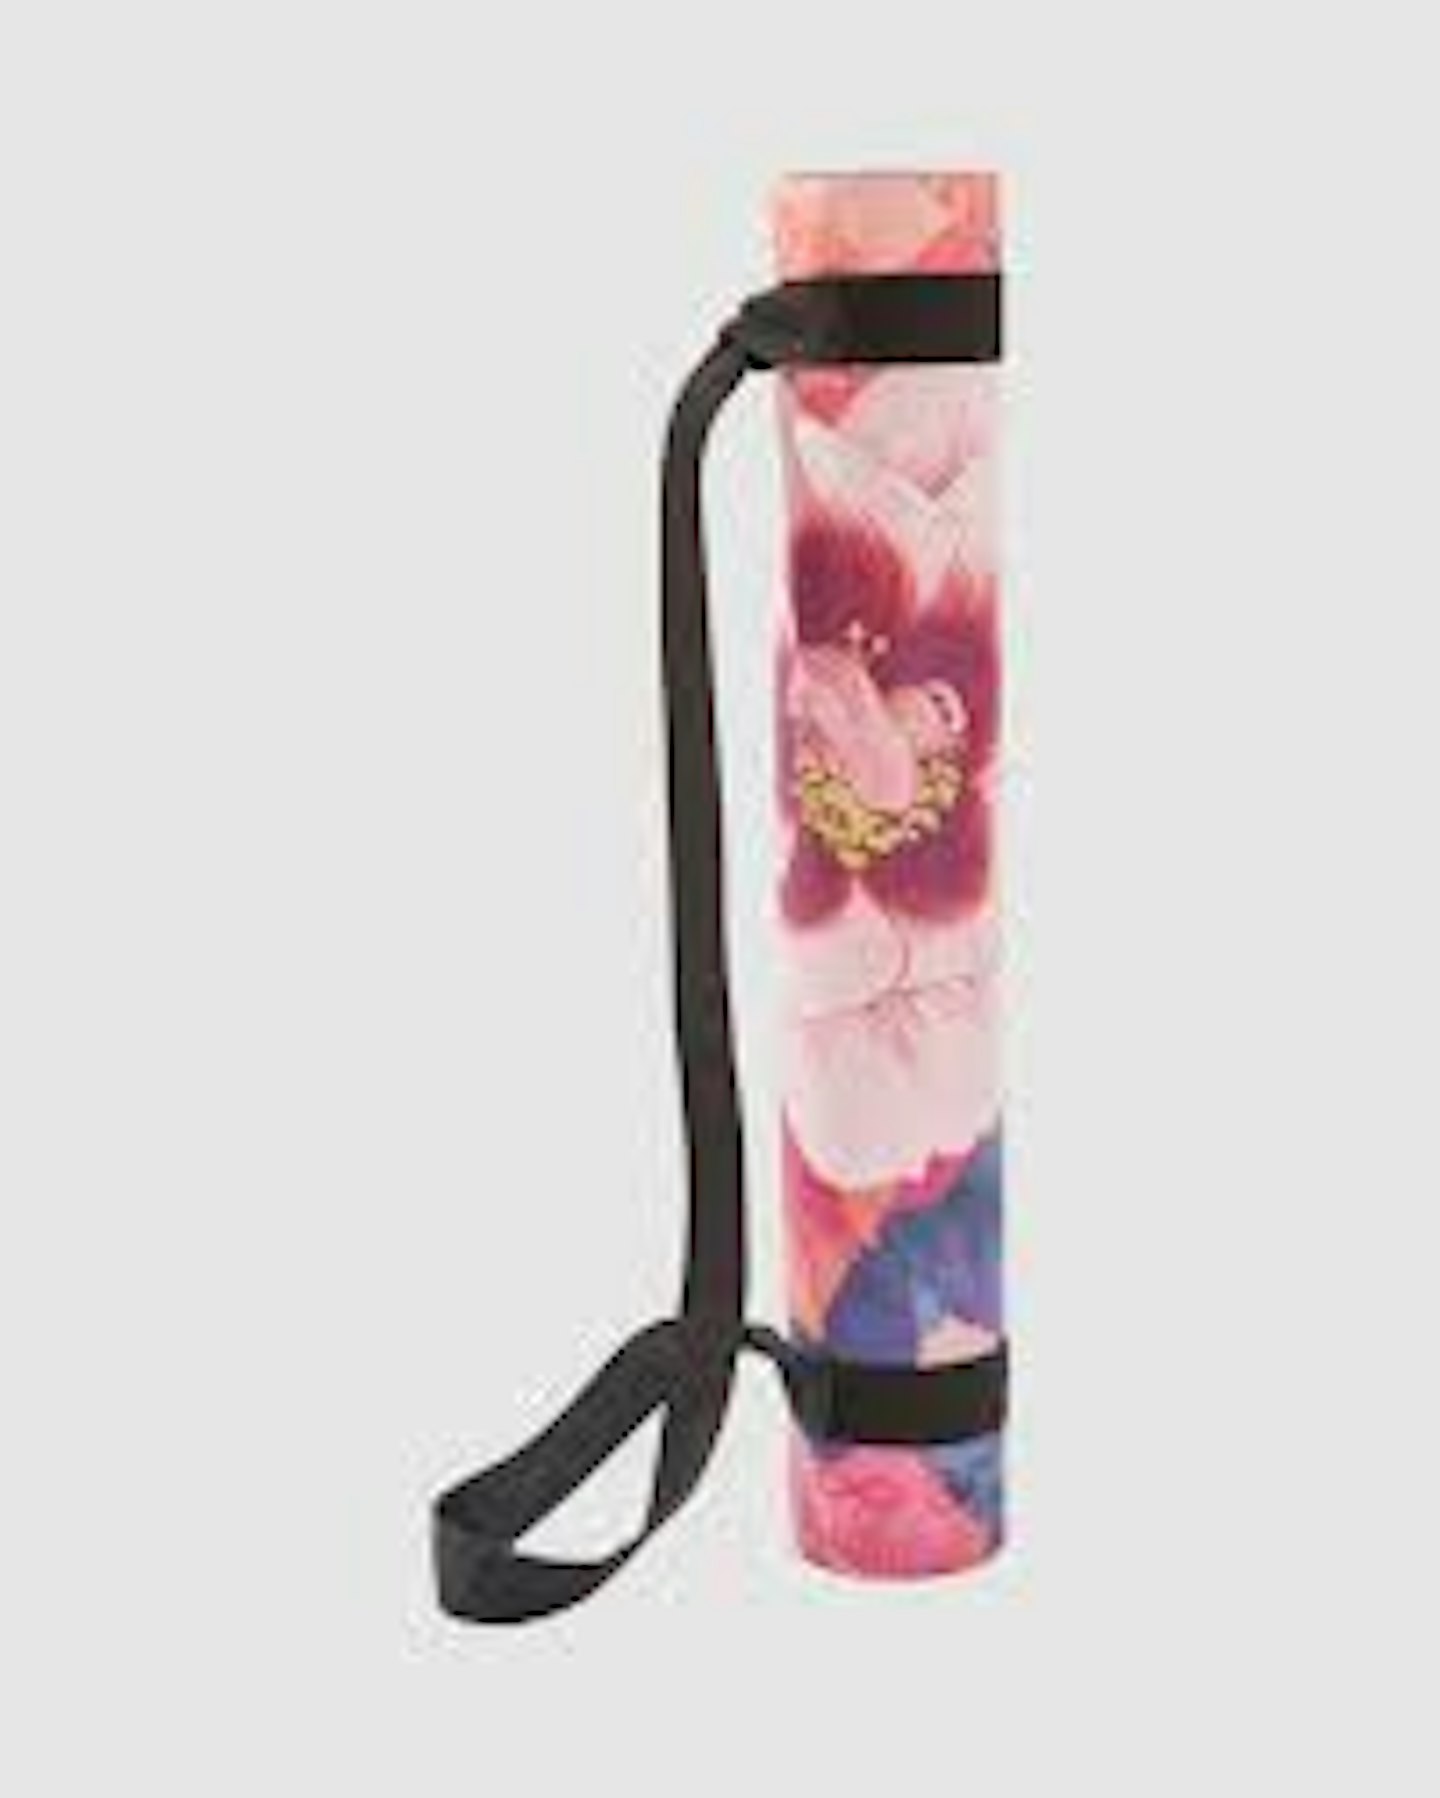 Bowern, The Rose Floral-print Rubber Yoga Mat, £115 at Net-a-Porter